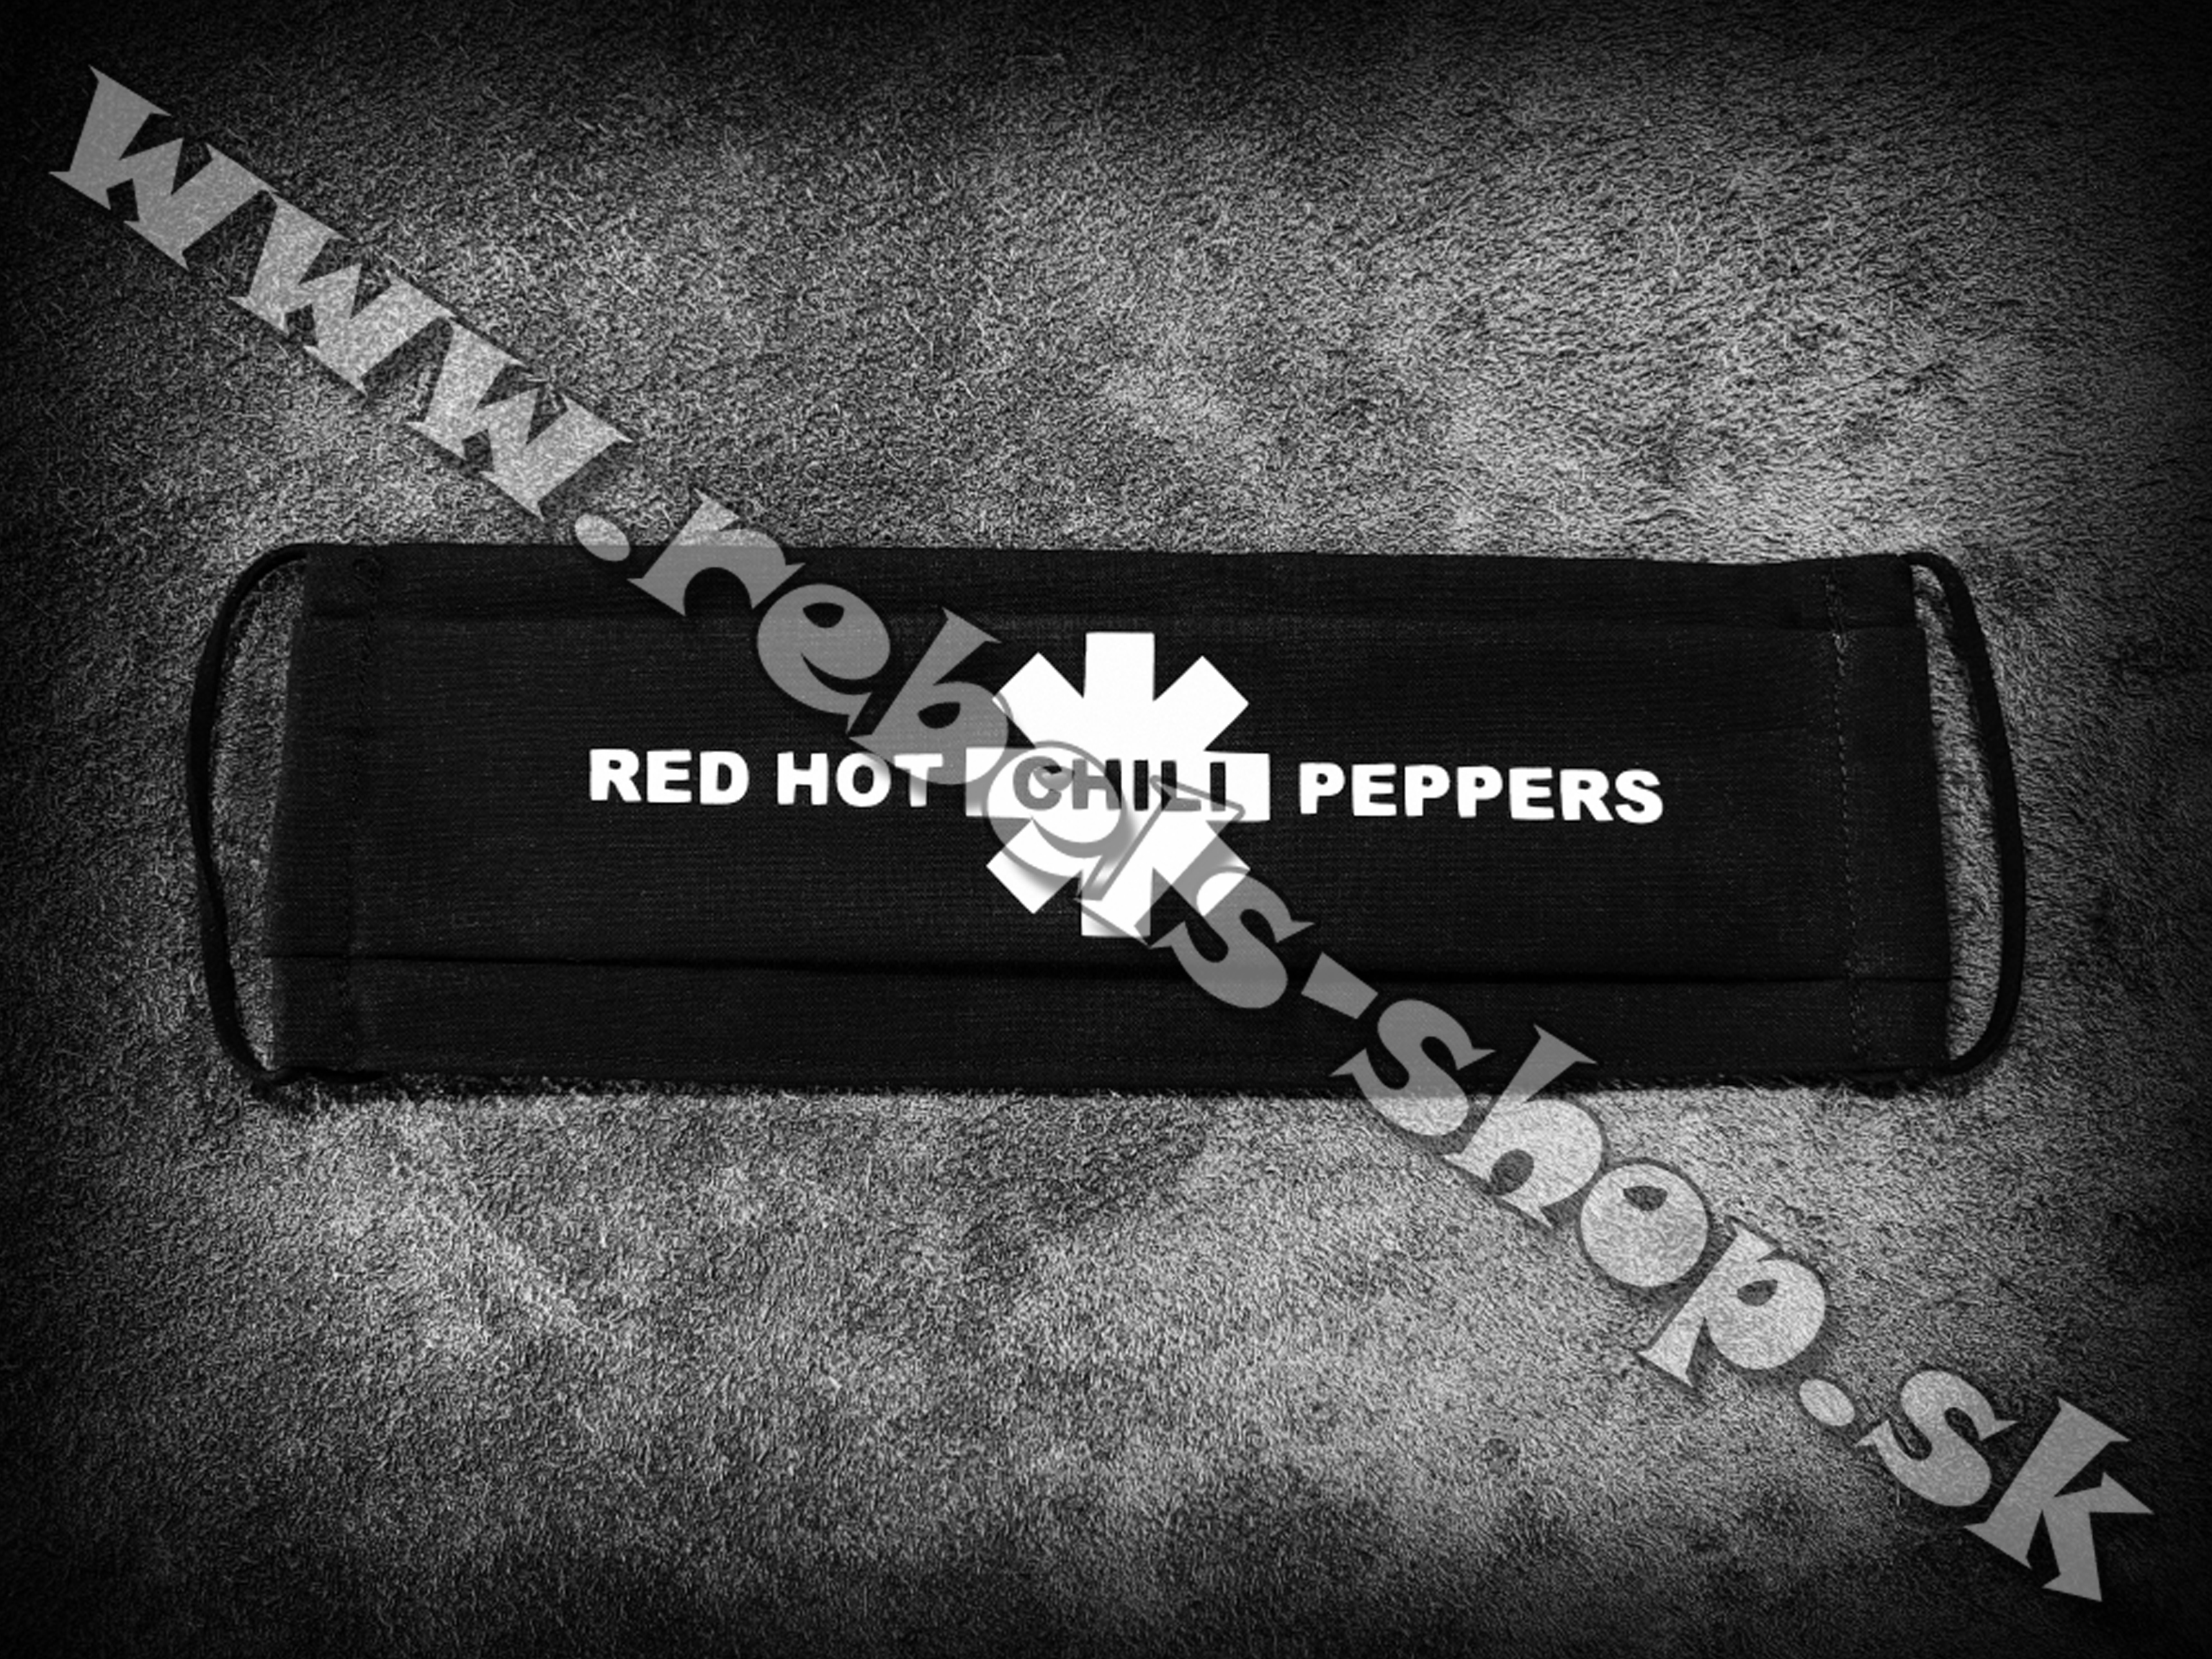 Rúško "Red Hot Chili Peppers"